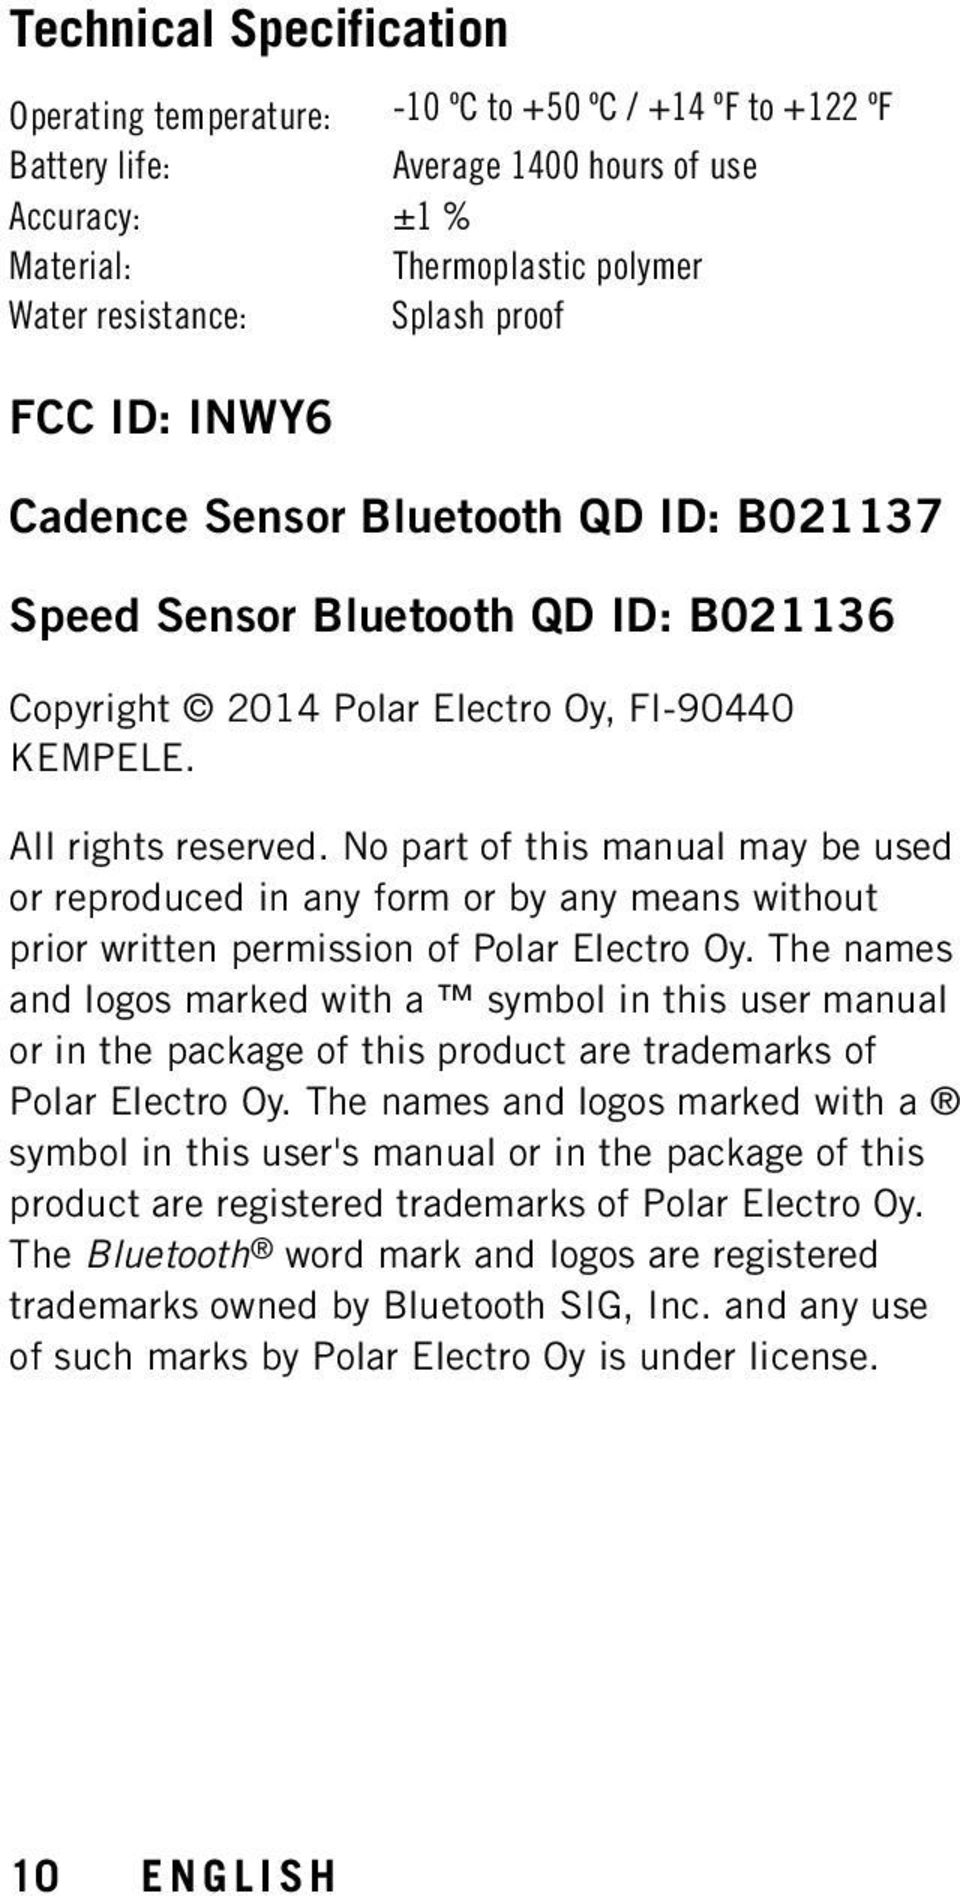 No part of this manual may be used or reproduced in any form or by any means without prior written permission of Polar Electro Oy.